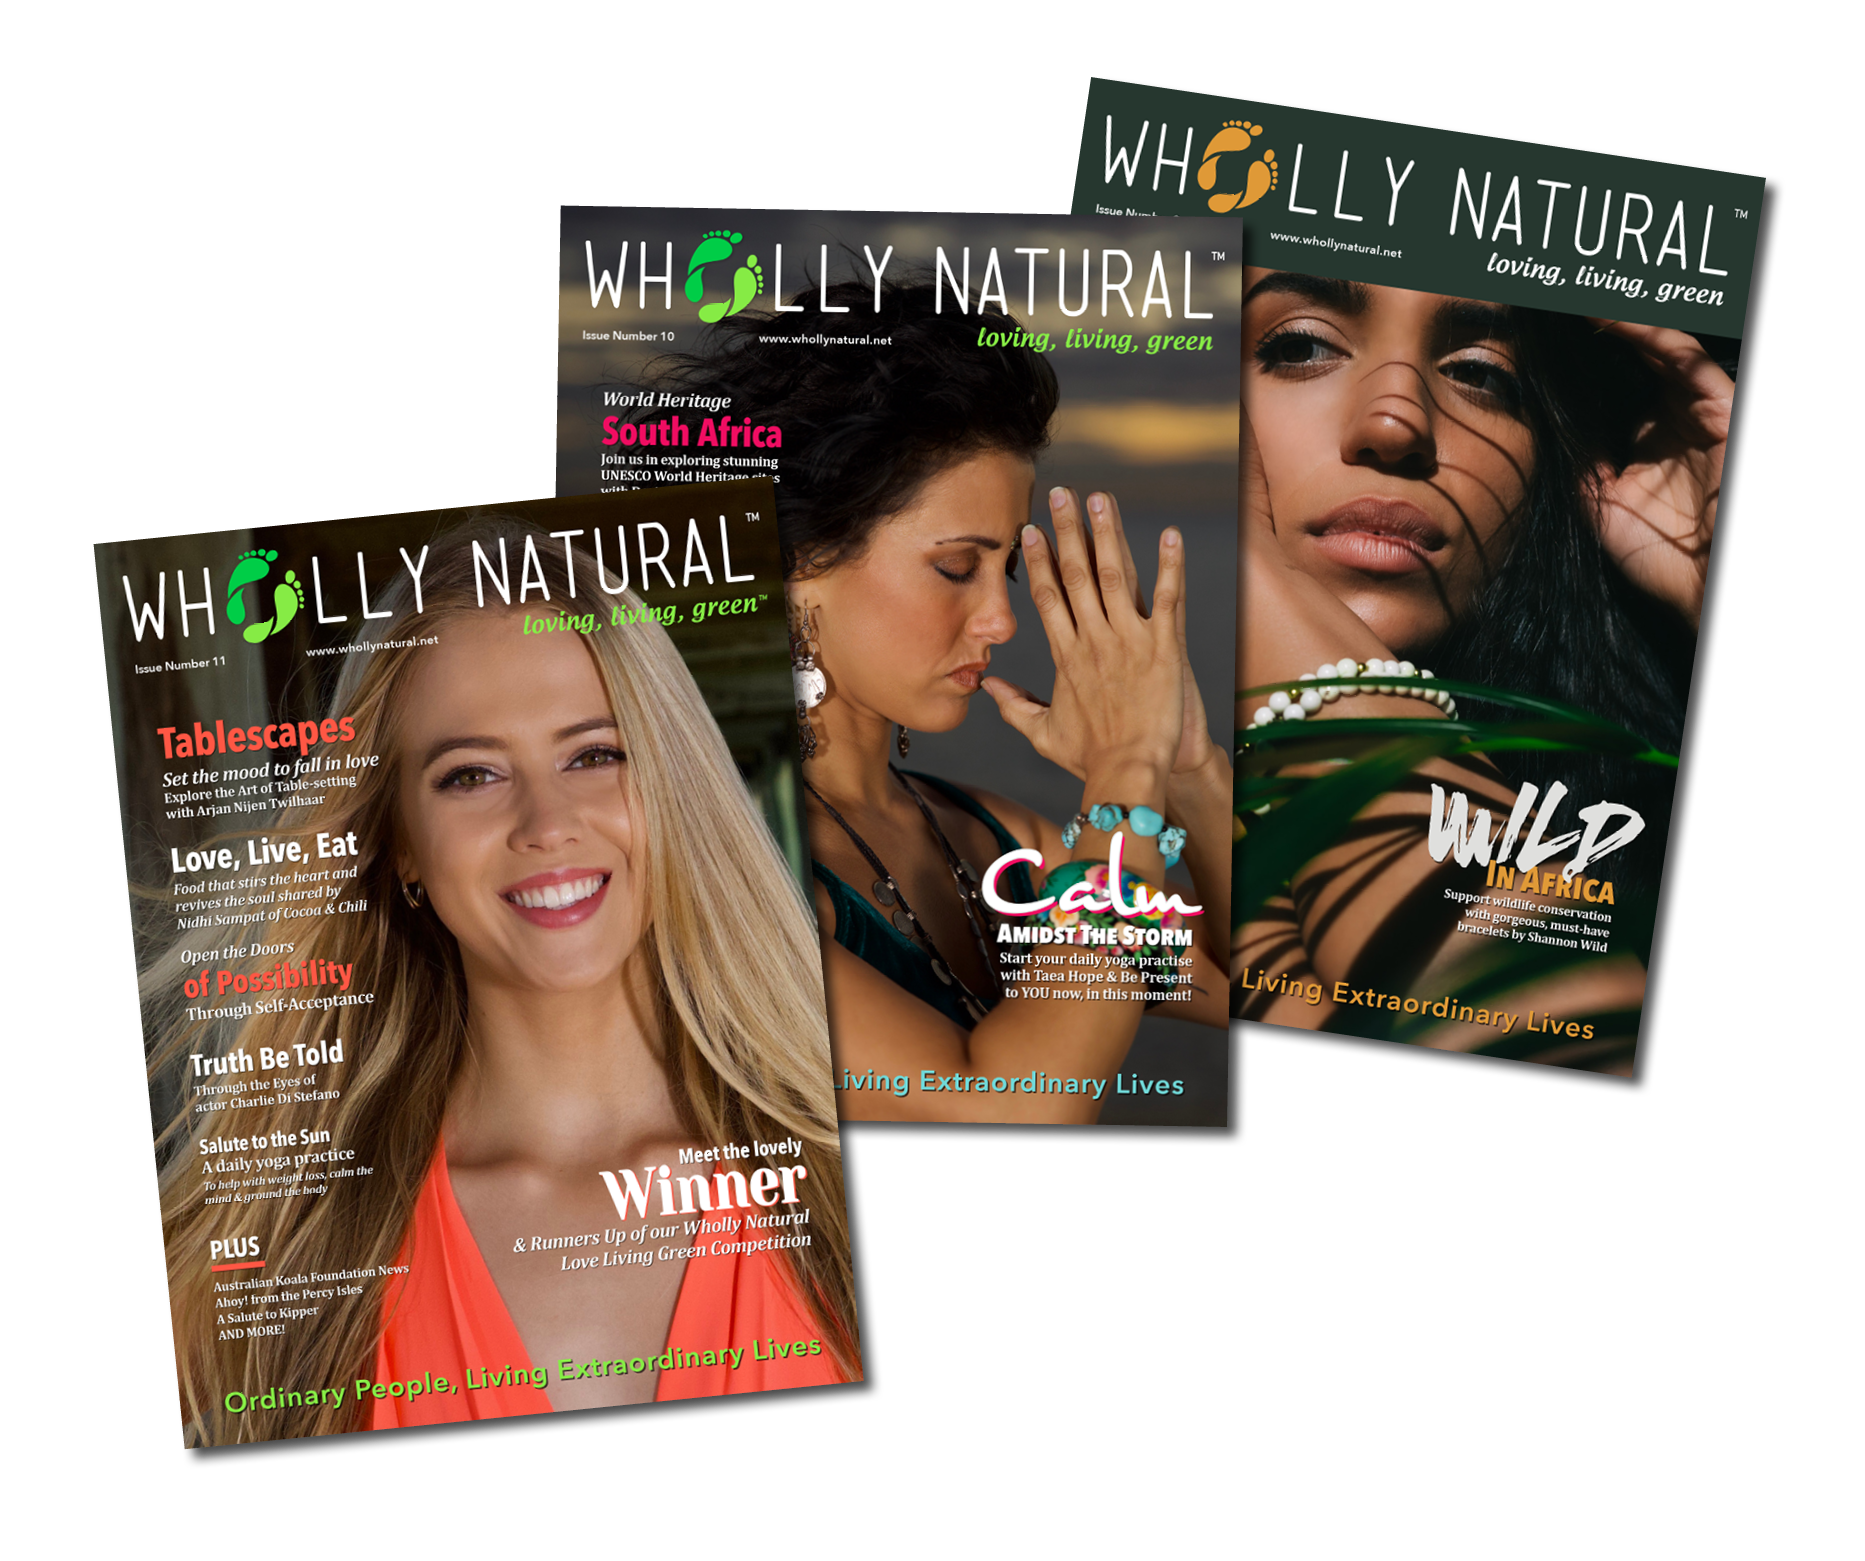 Covers of issues 9 – 11 of Wholly Natural Magazine™